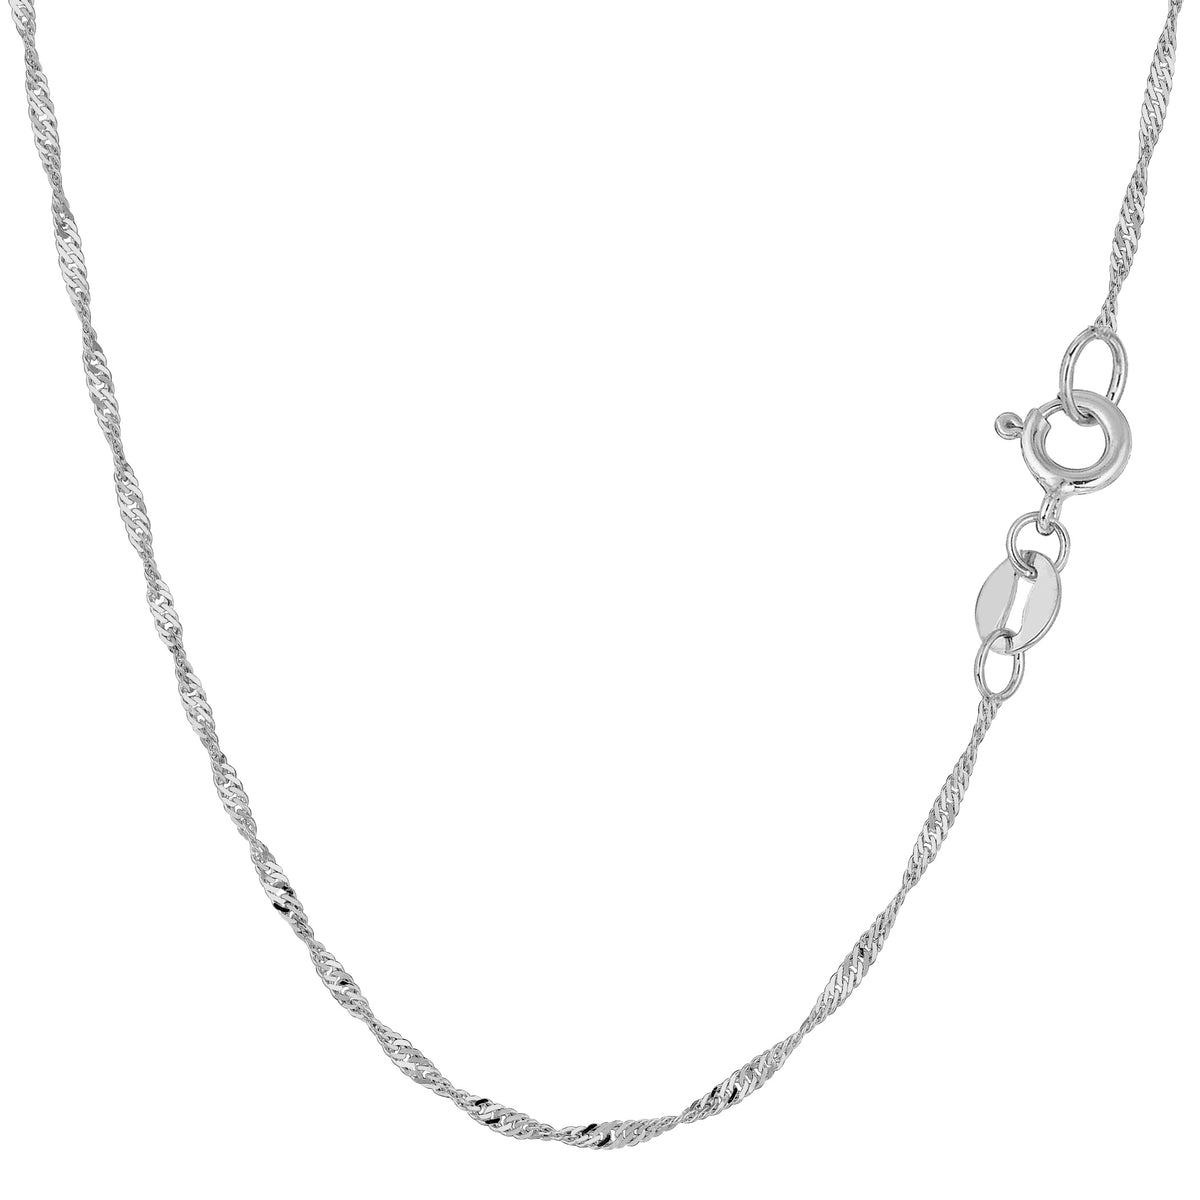 10k White Gold Singapore Chain Necklace, 1.5mm fine designer jewelry for men and women